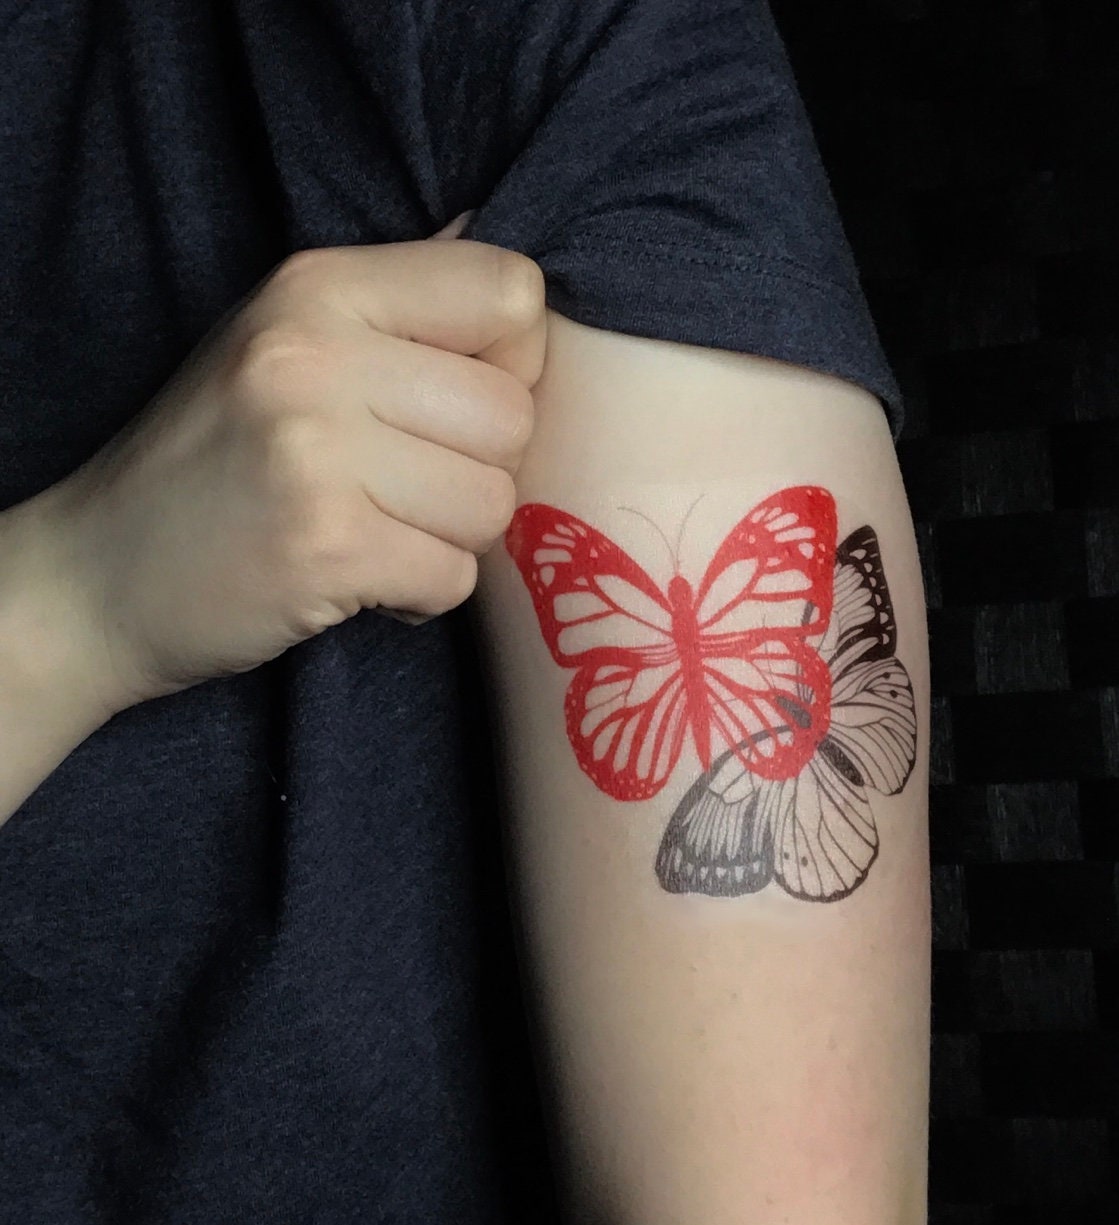 Red Butterflies I did on my client fypシ foryou tattooinspo tattooi   92K Views  TikTok